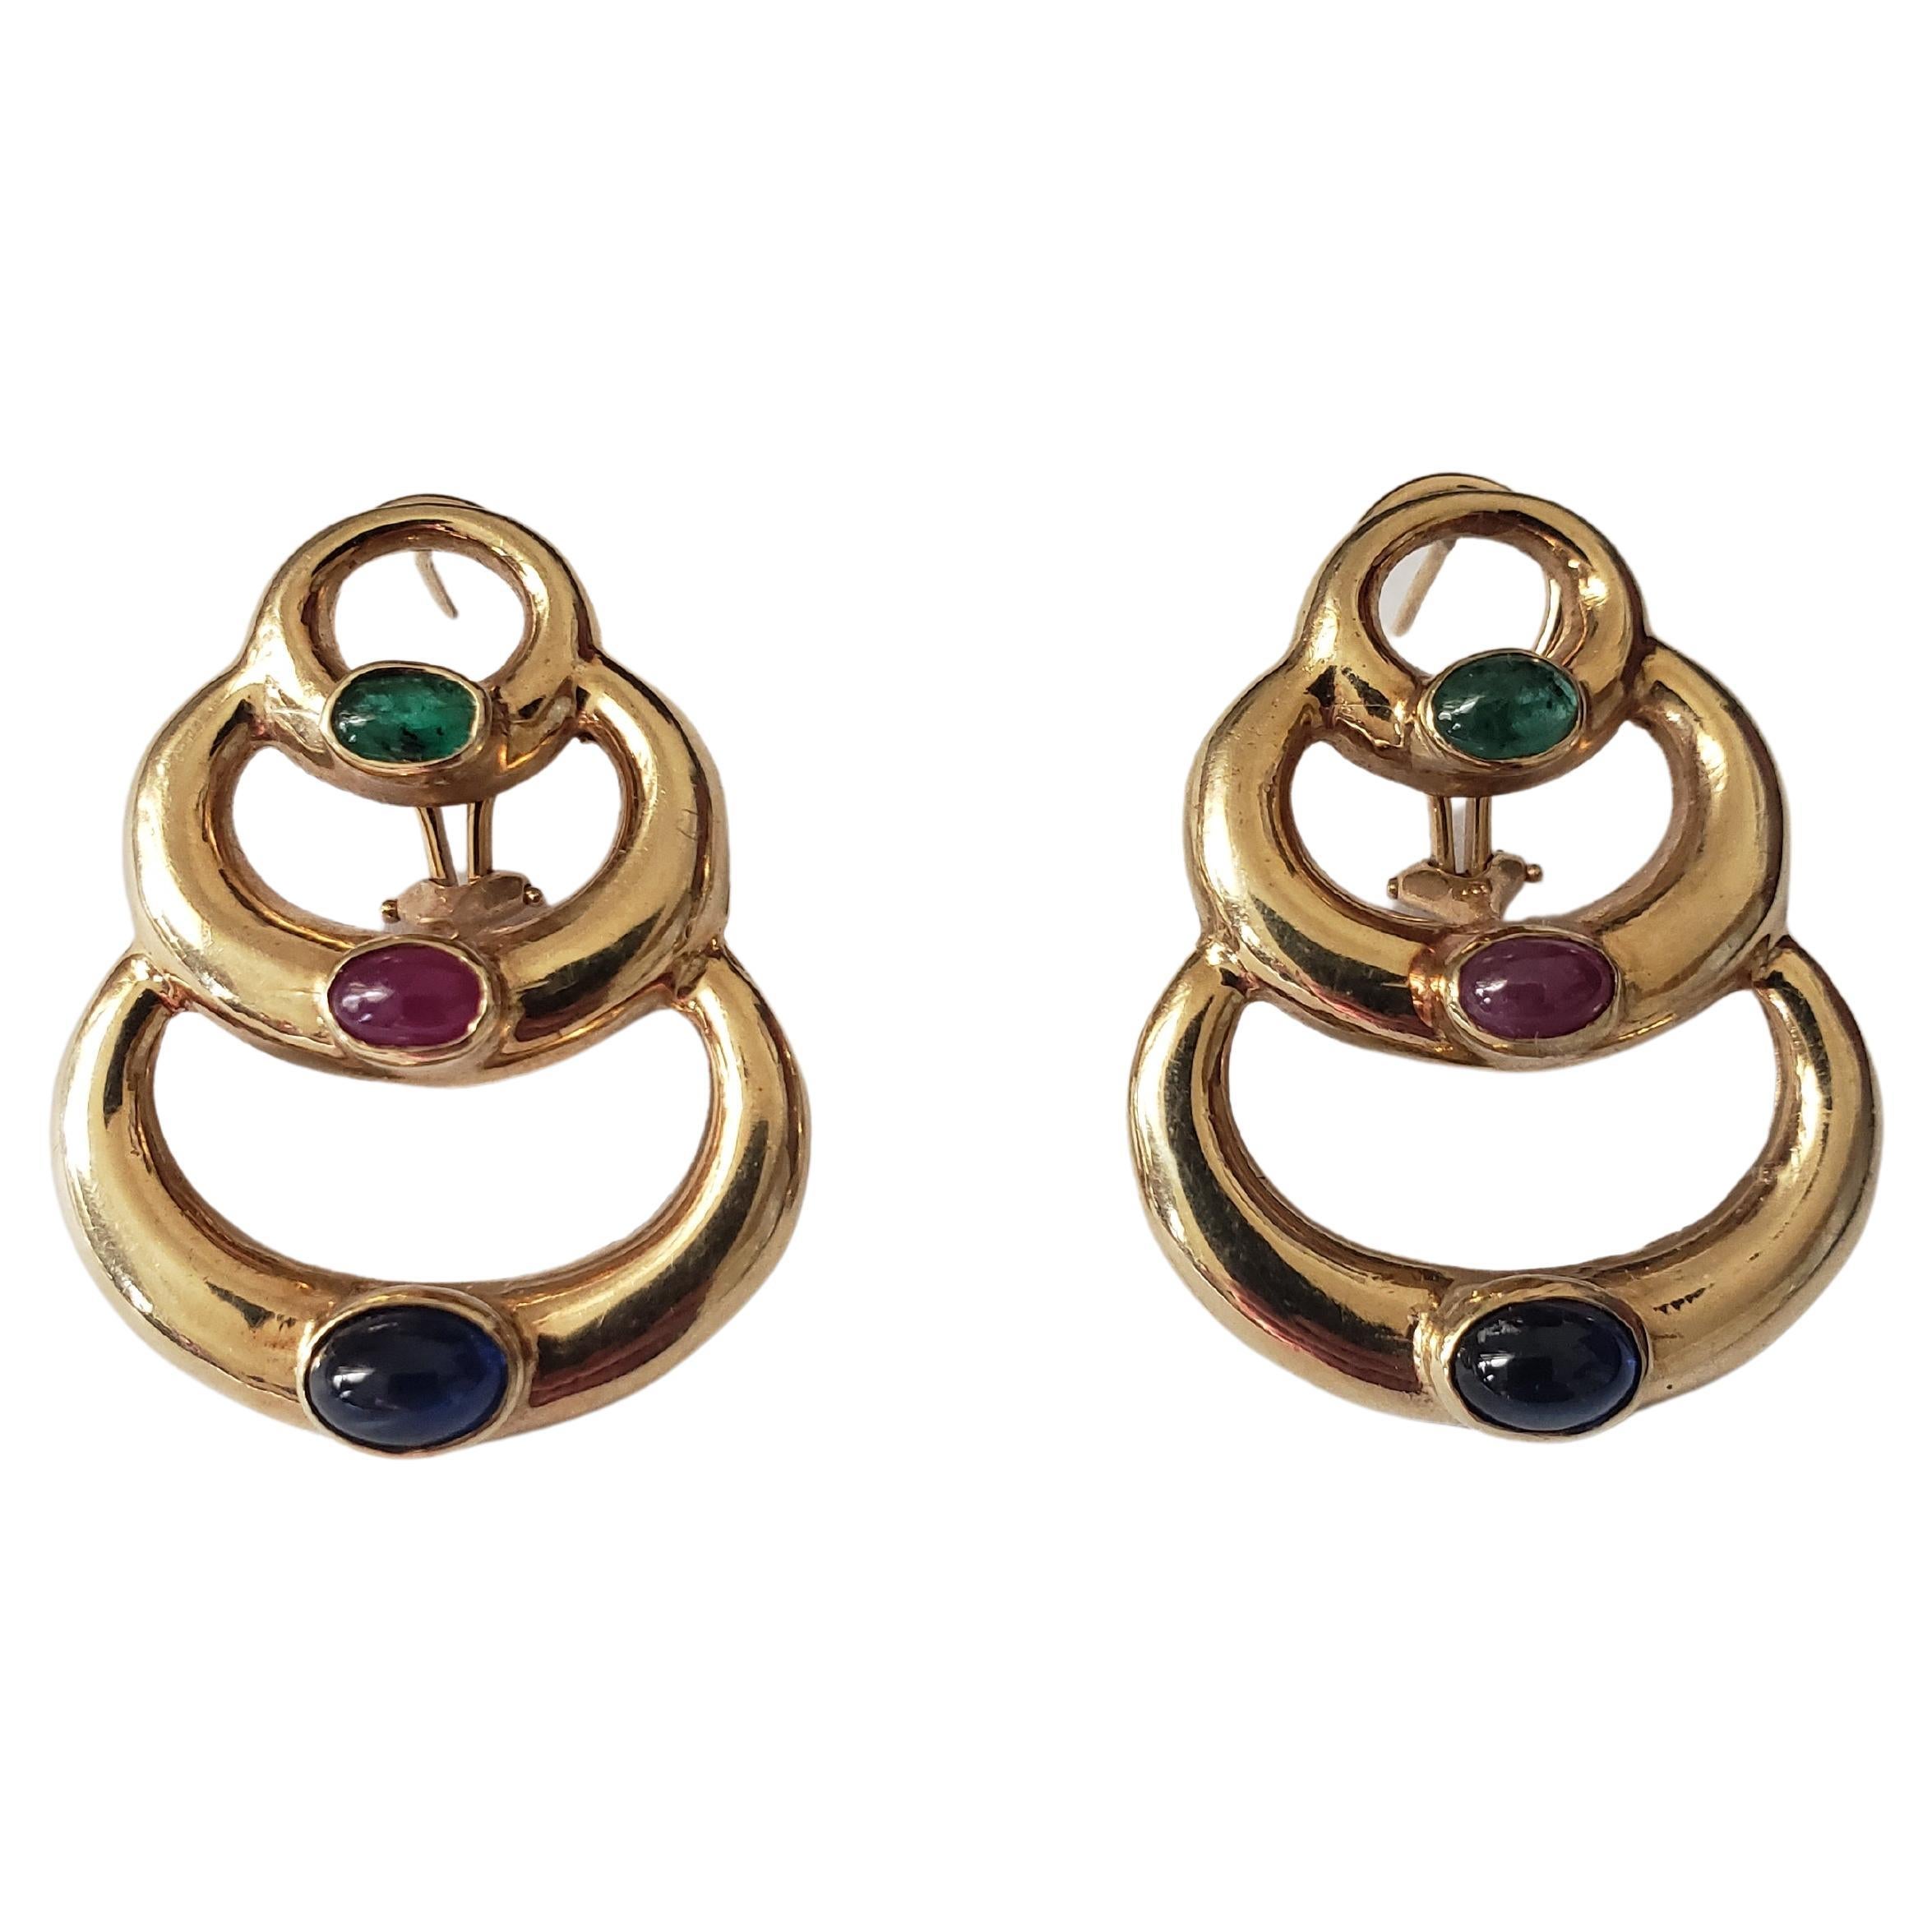 NEW 14K Solid Yellow Gold Natural Sapphire, Ruby and Emerald Earrings